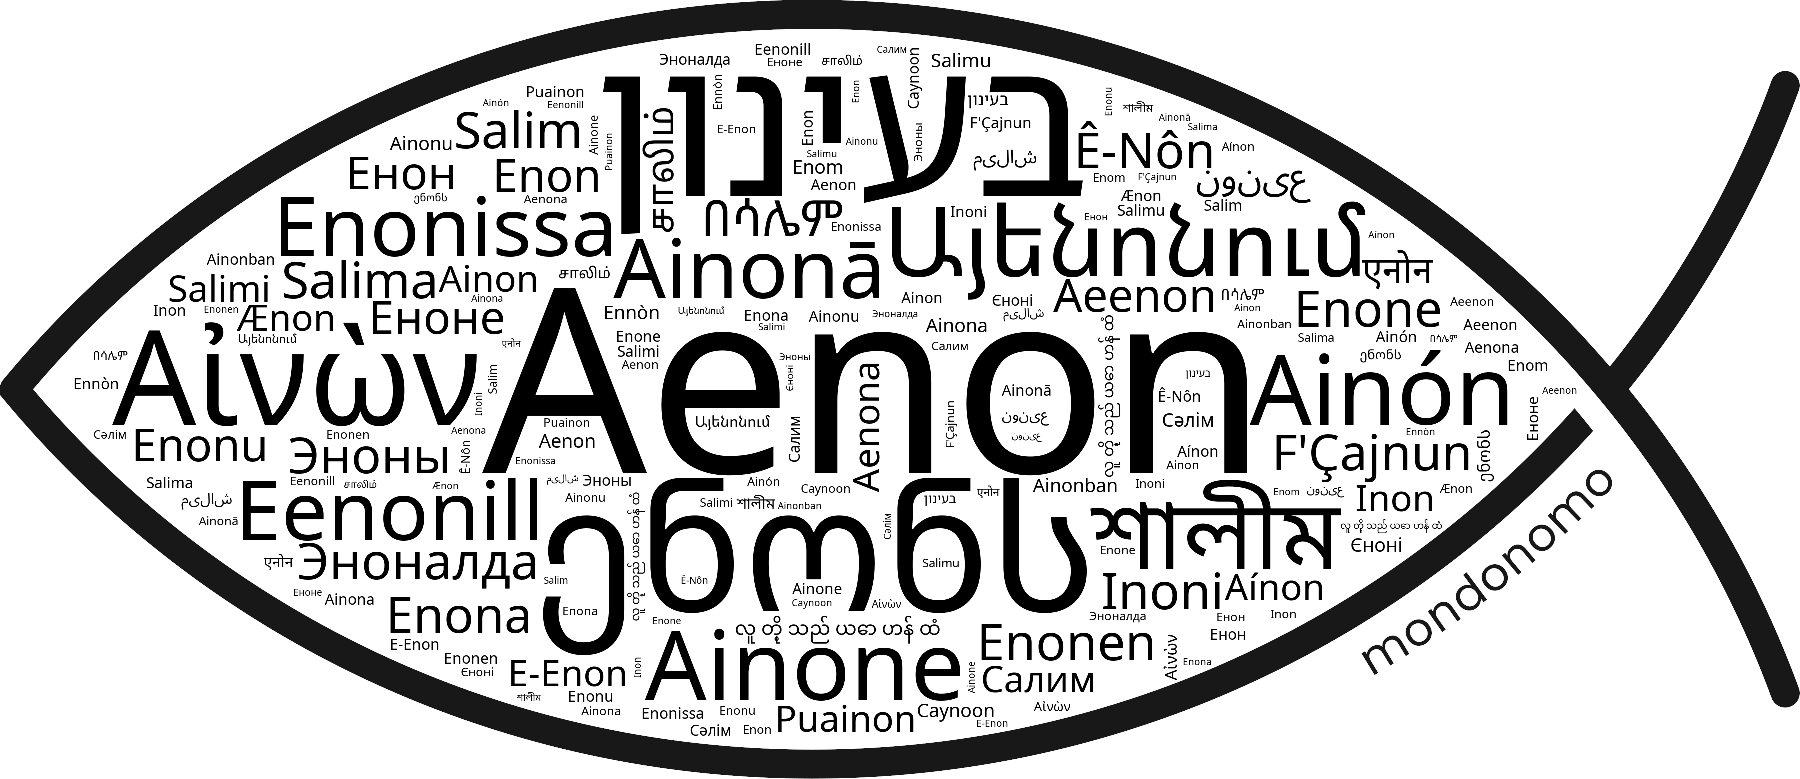 Name Aenon in the world's Bibles